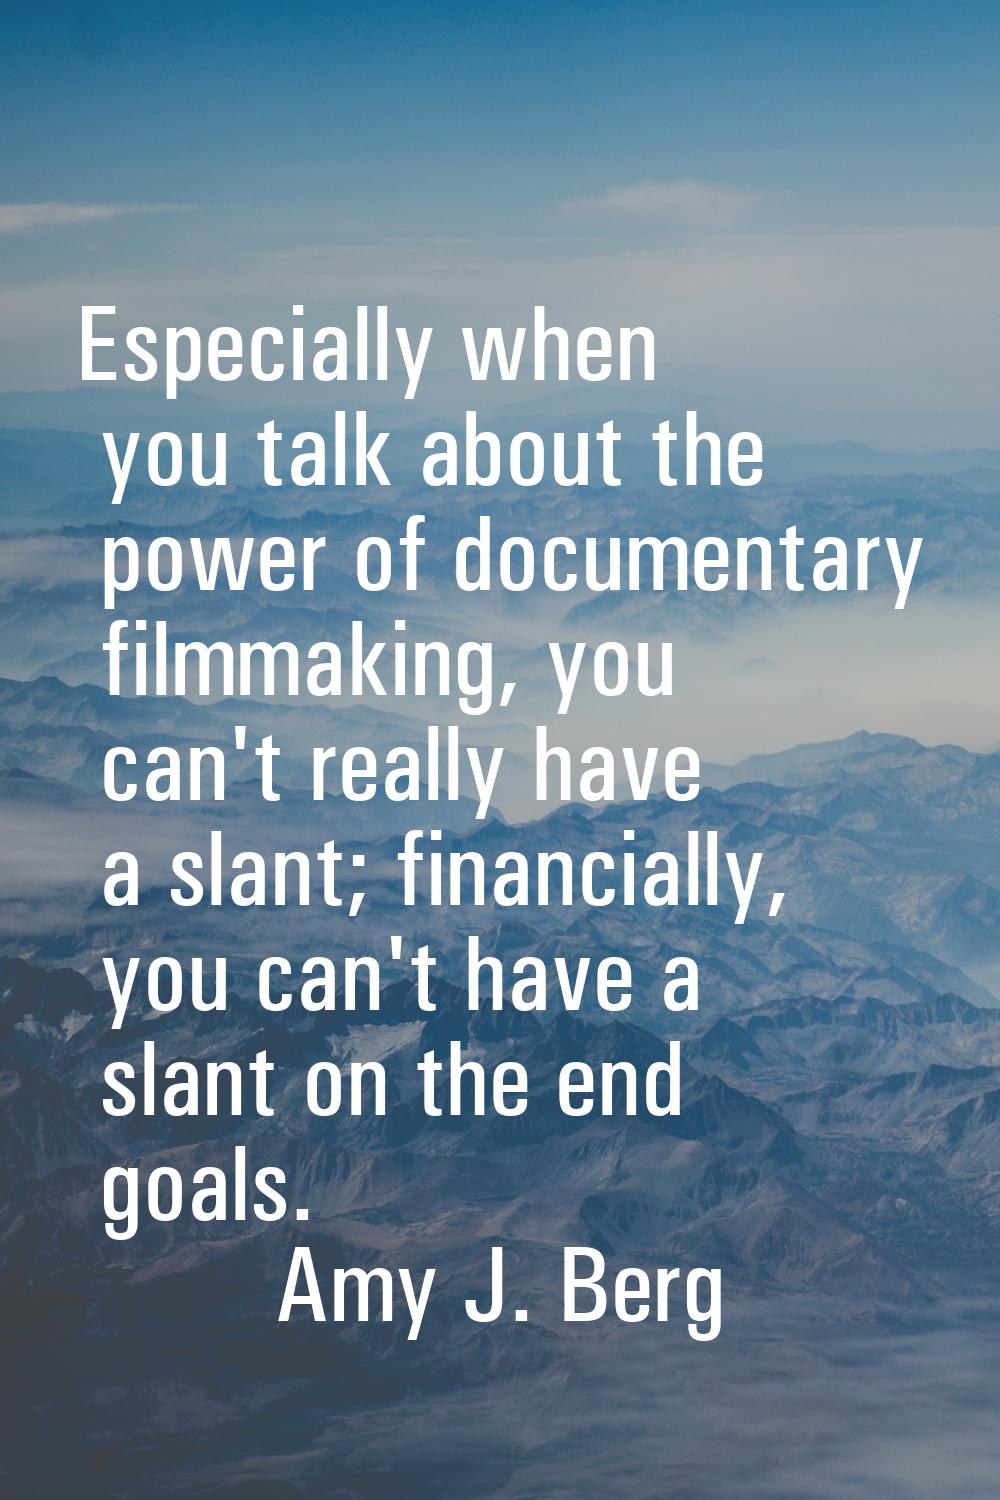 Especially when you talk about the power of documentary filmmaking, you can't really have a slant; 